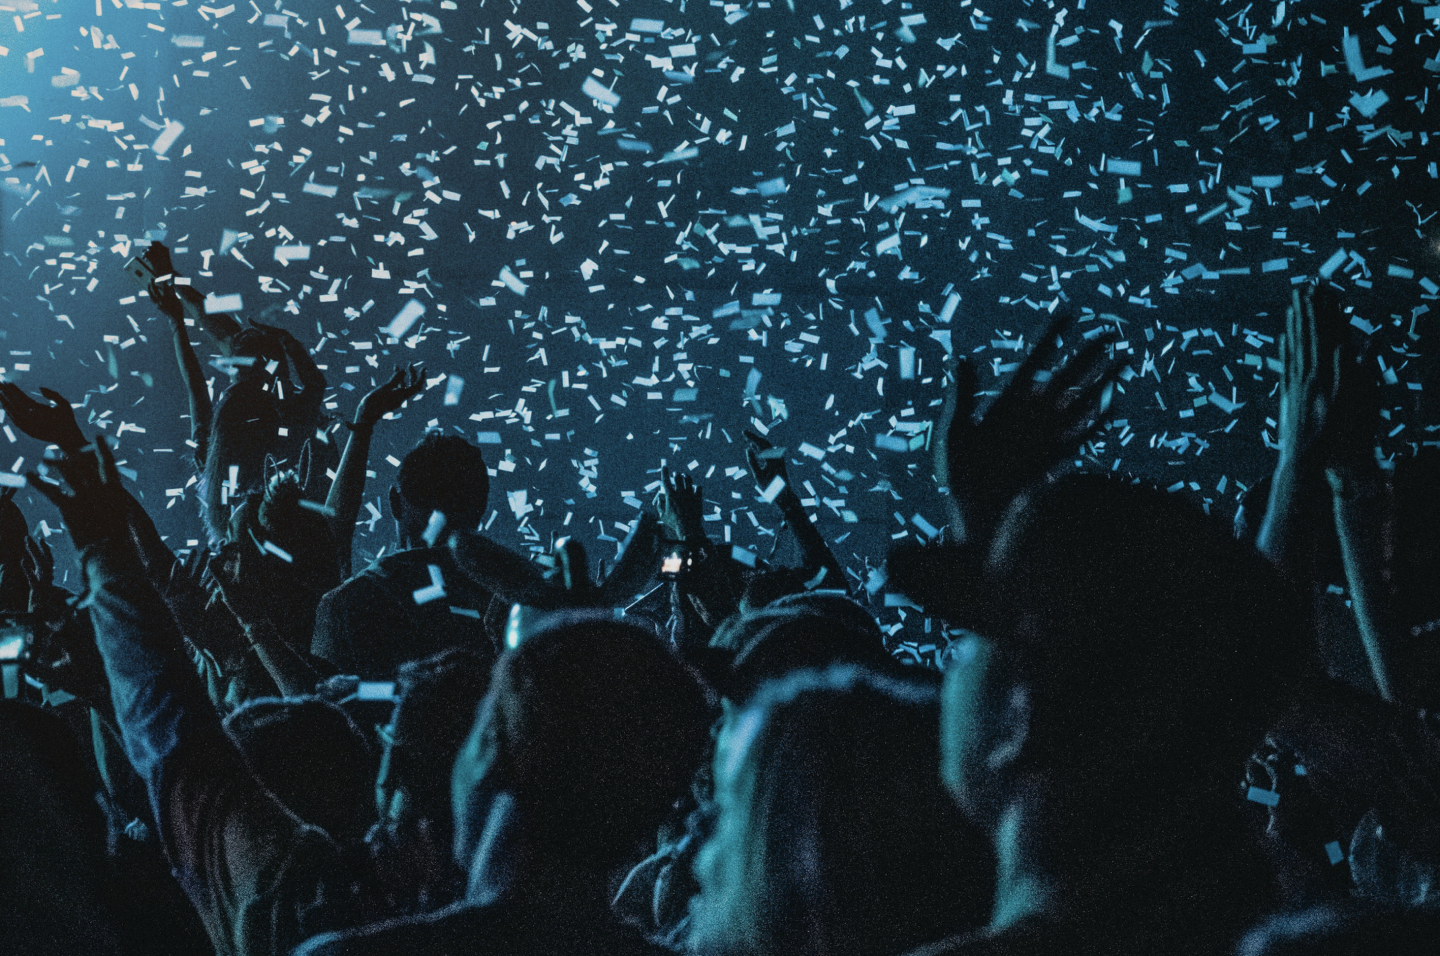 Paper confetti floating through the air onto an audience of dimly lit people watching a concert